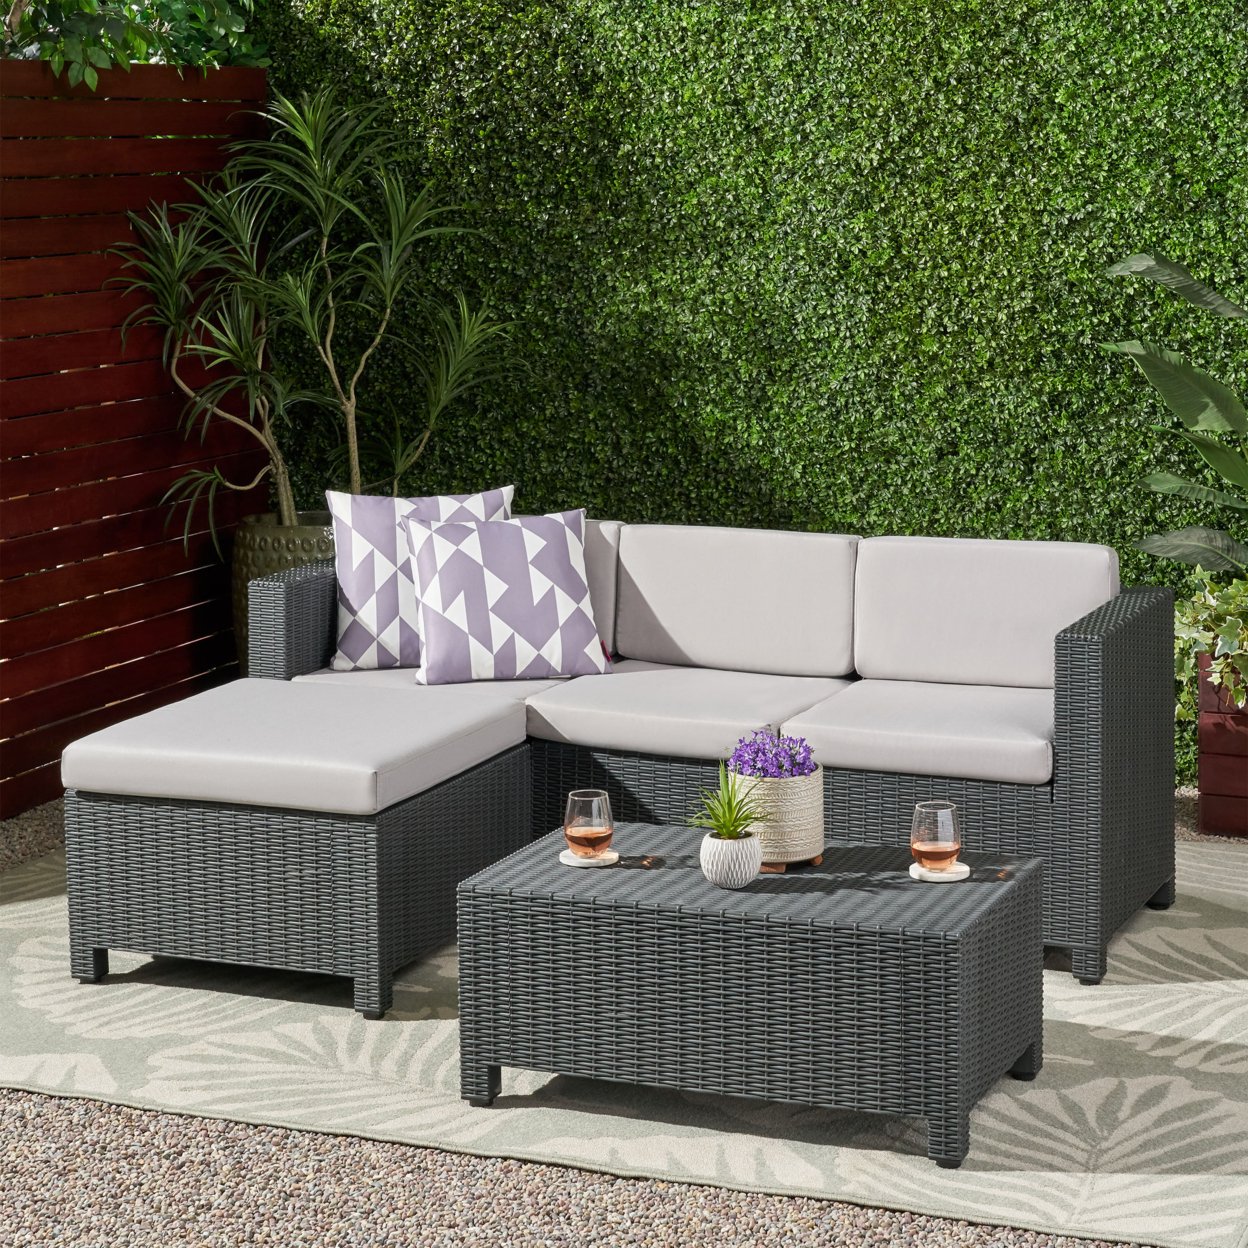 Odessa Outdoor Wicker 3 Seater Sectional Set With Ottoman - Dark Gray + Gray